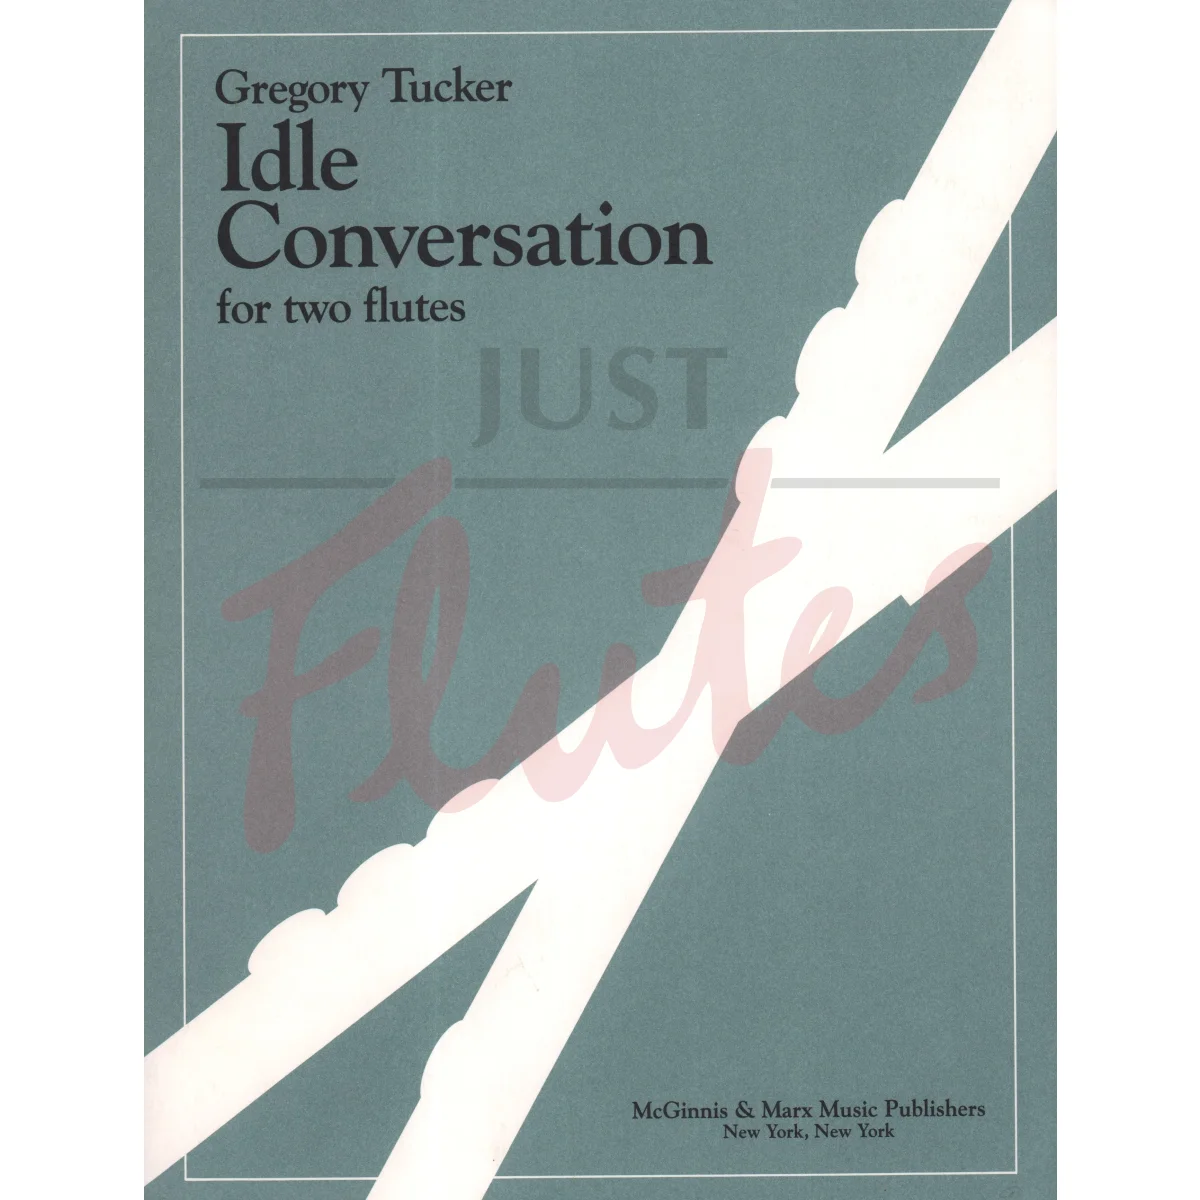 Idle Conversation for Two Flutes